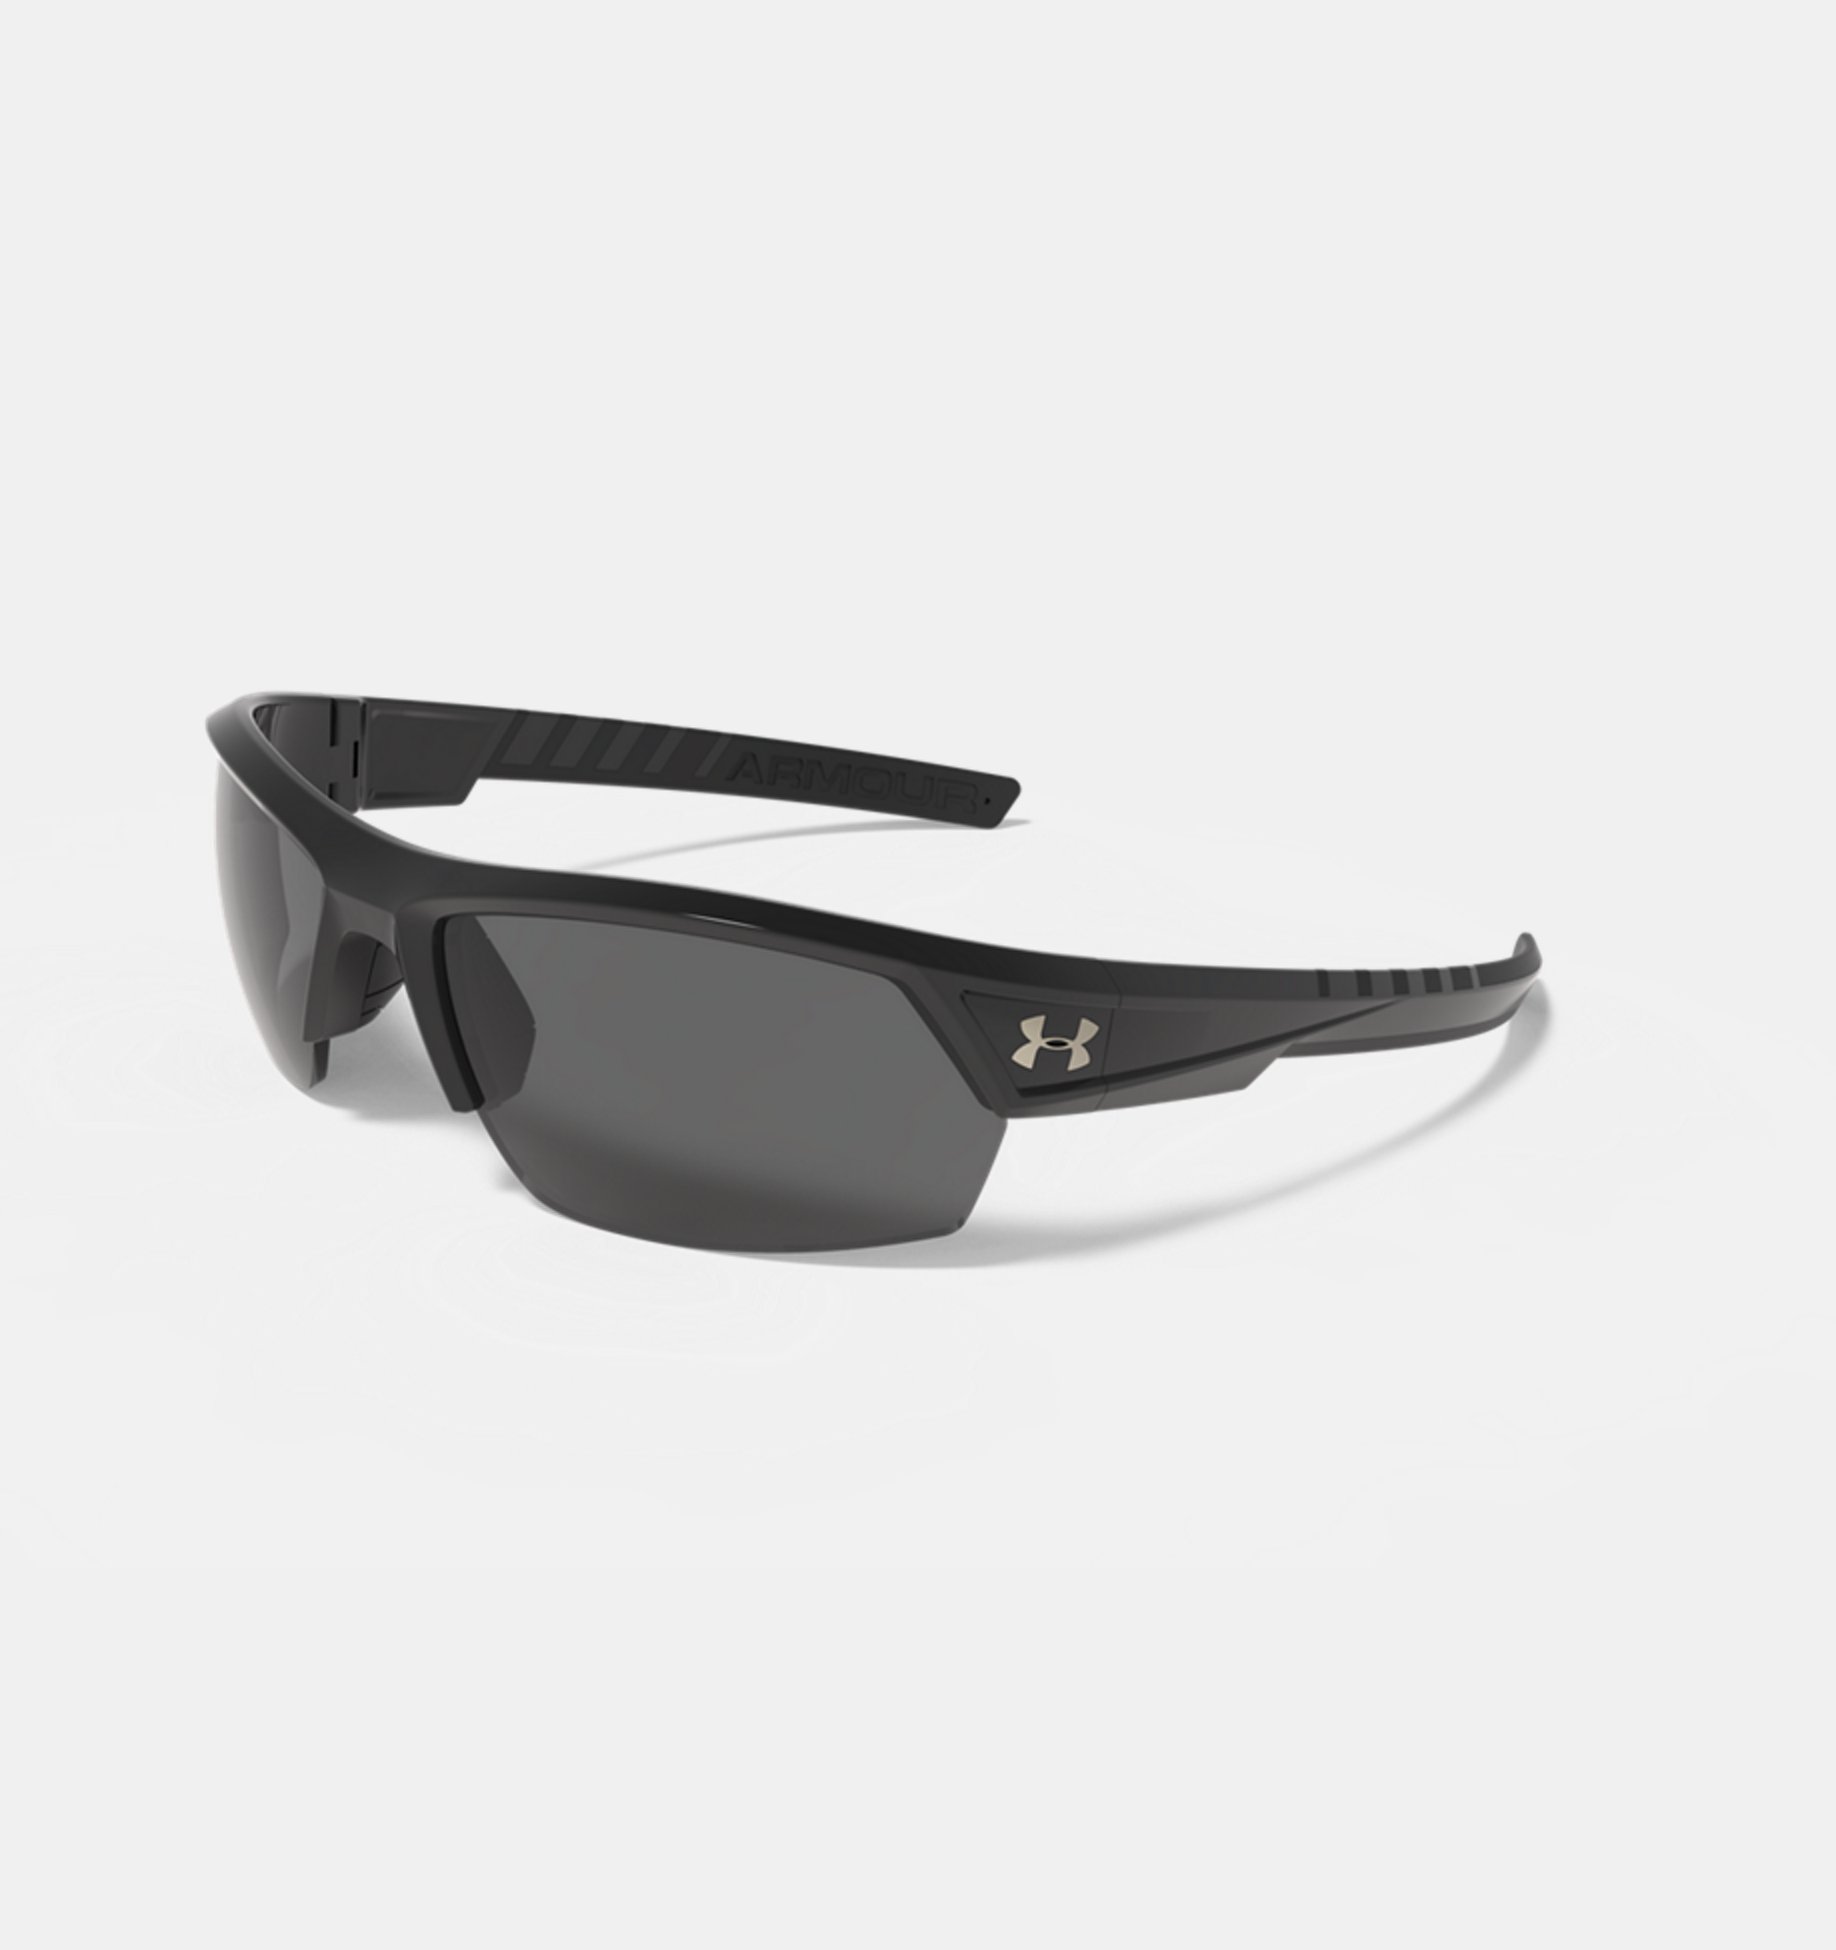 New Under Armour Igniter Sunglasses Choose Your Color and Style! 